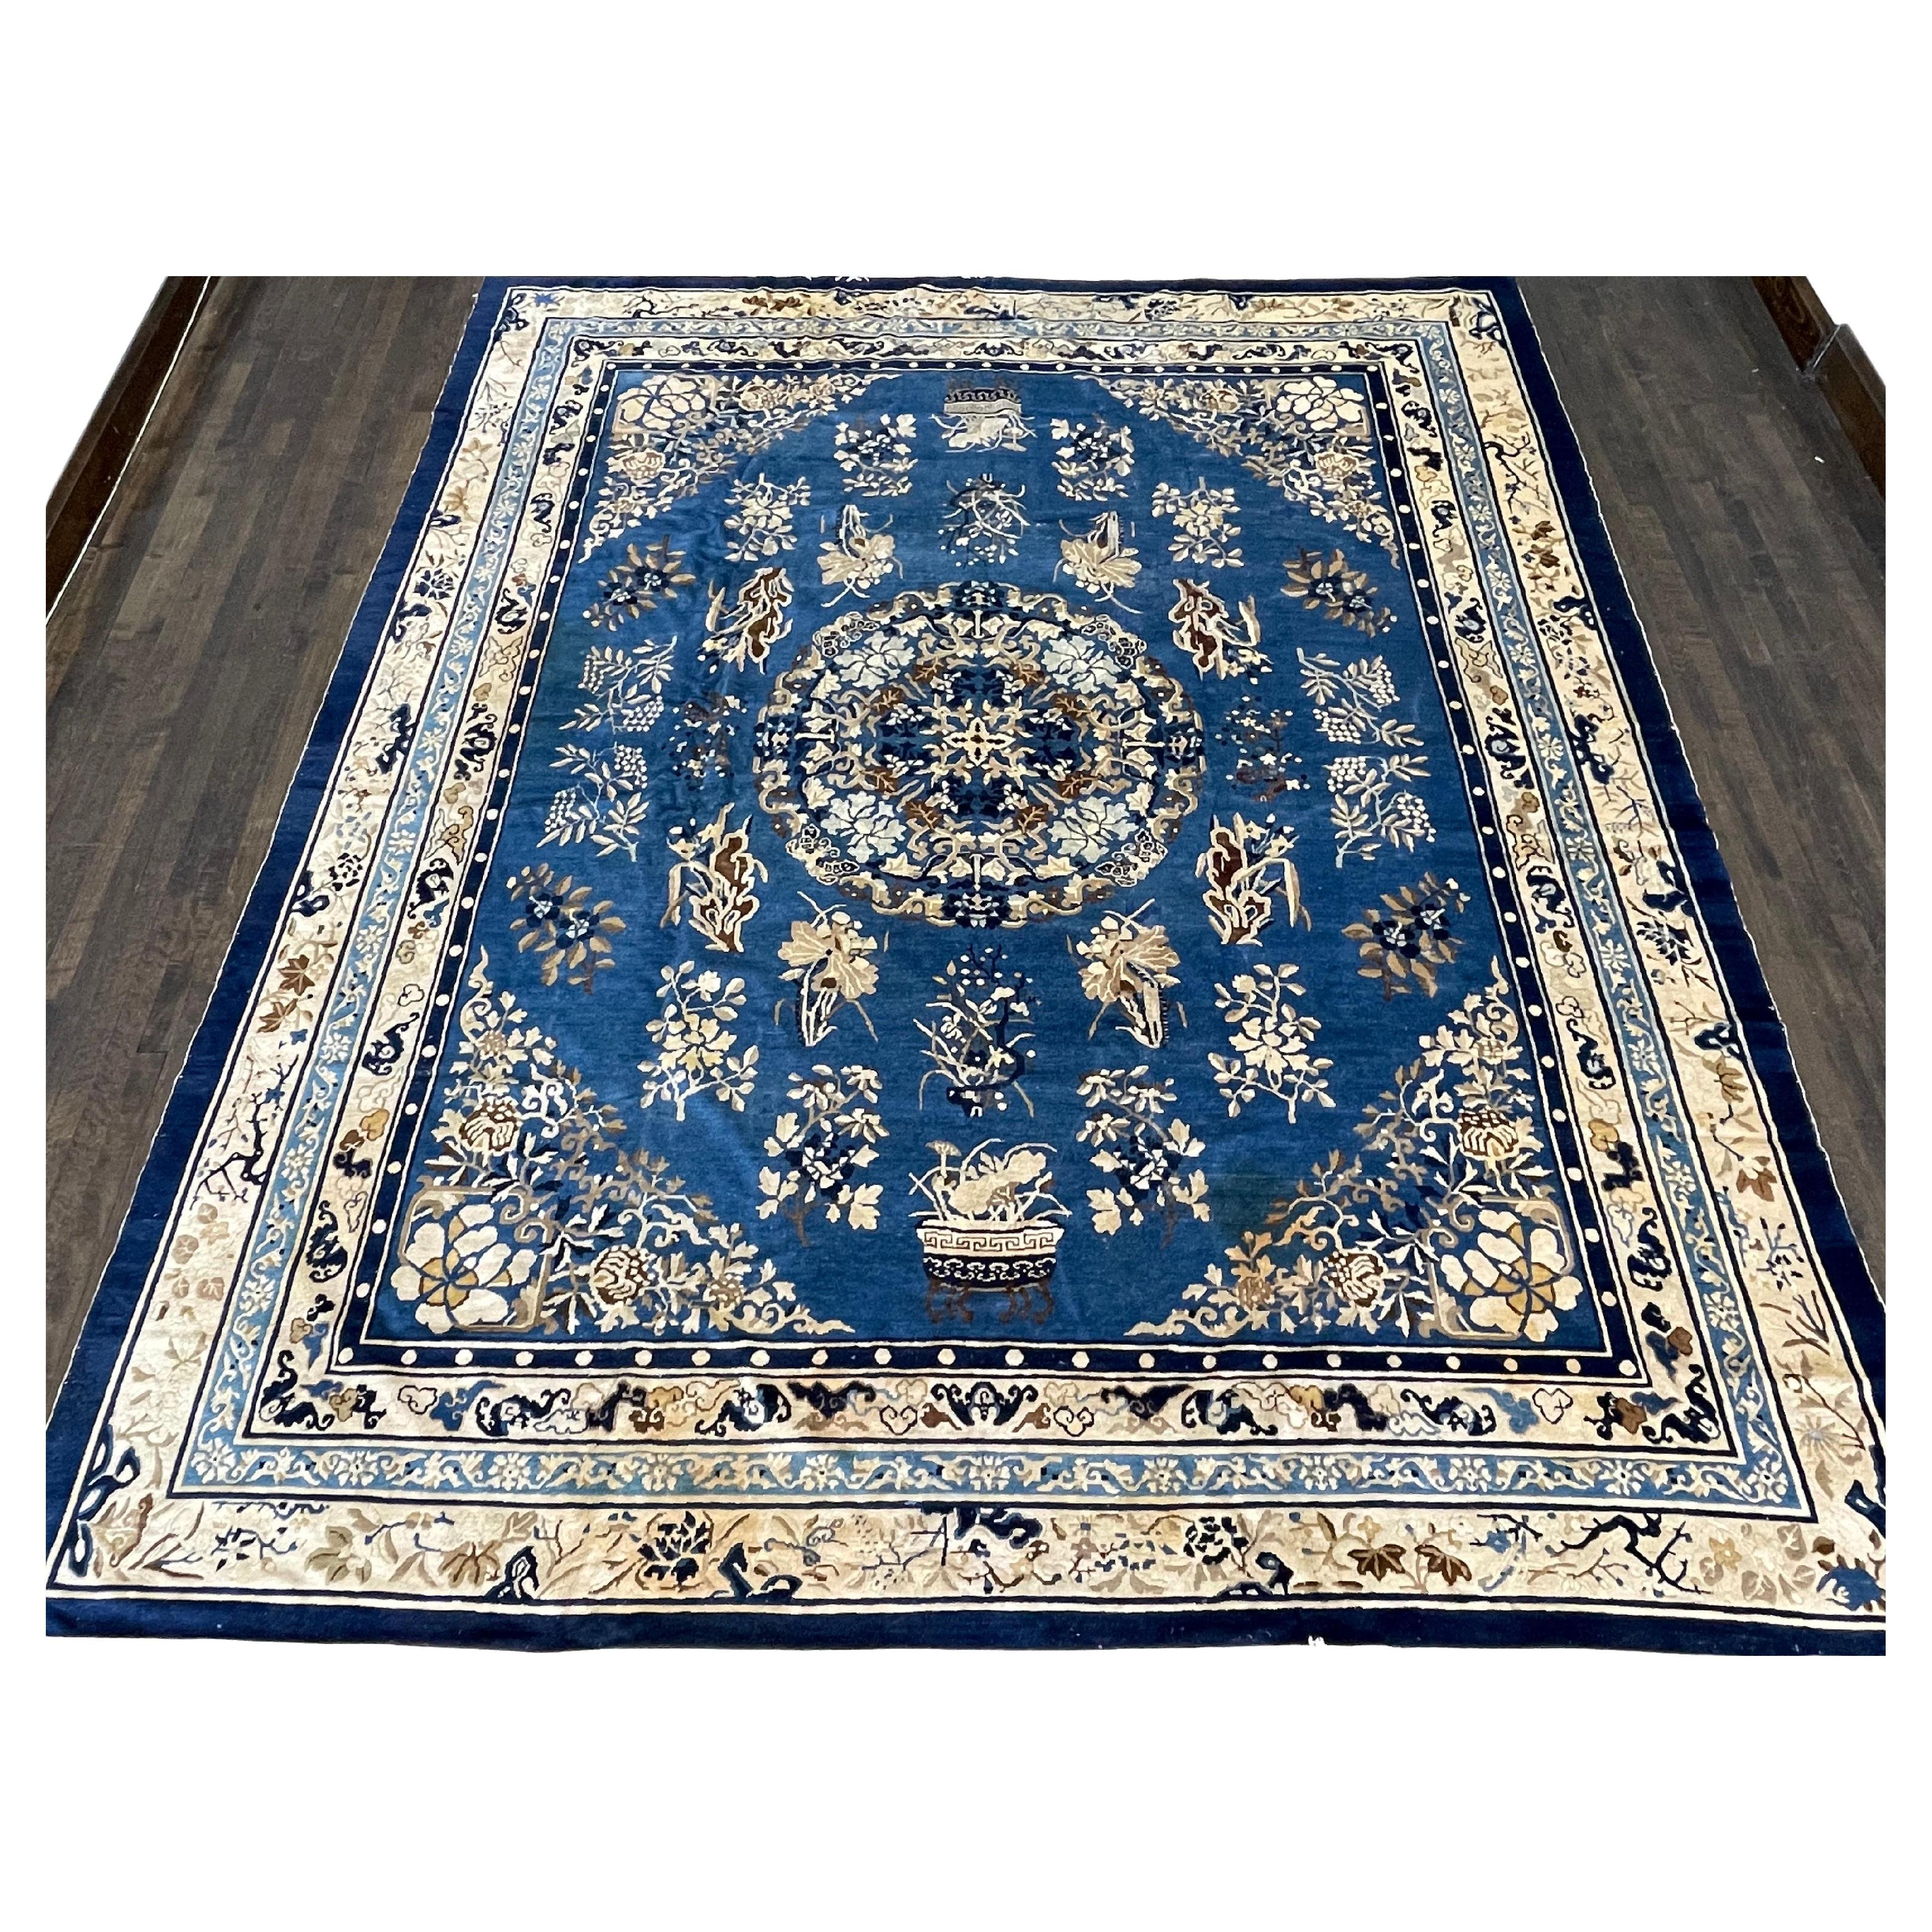 Tapis chinois ancien de style continental chinois, vers 1890